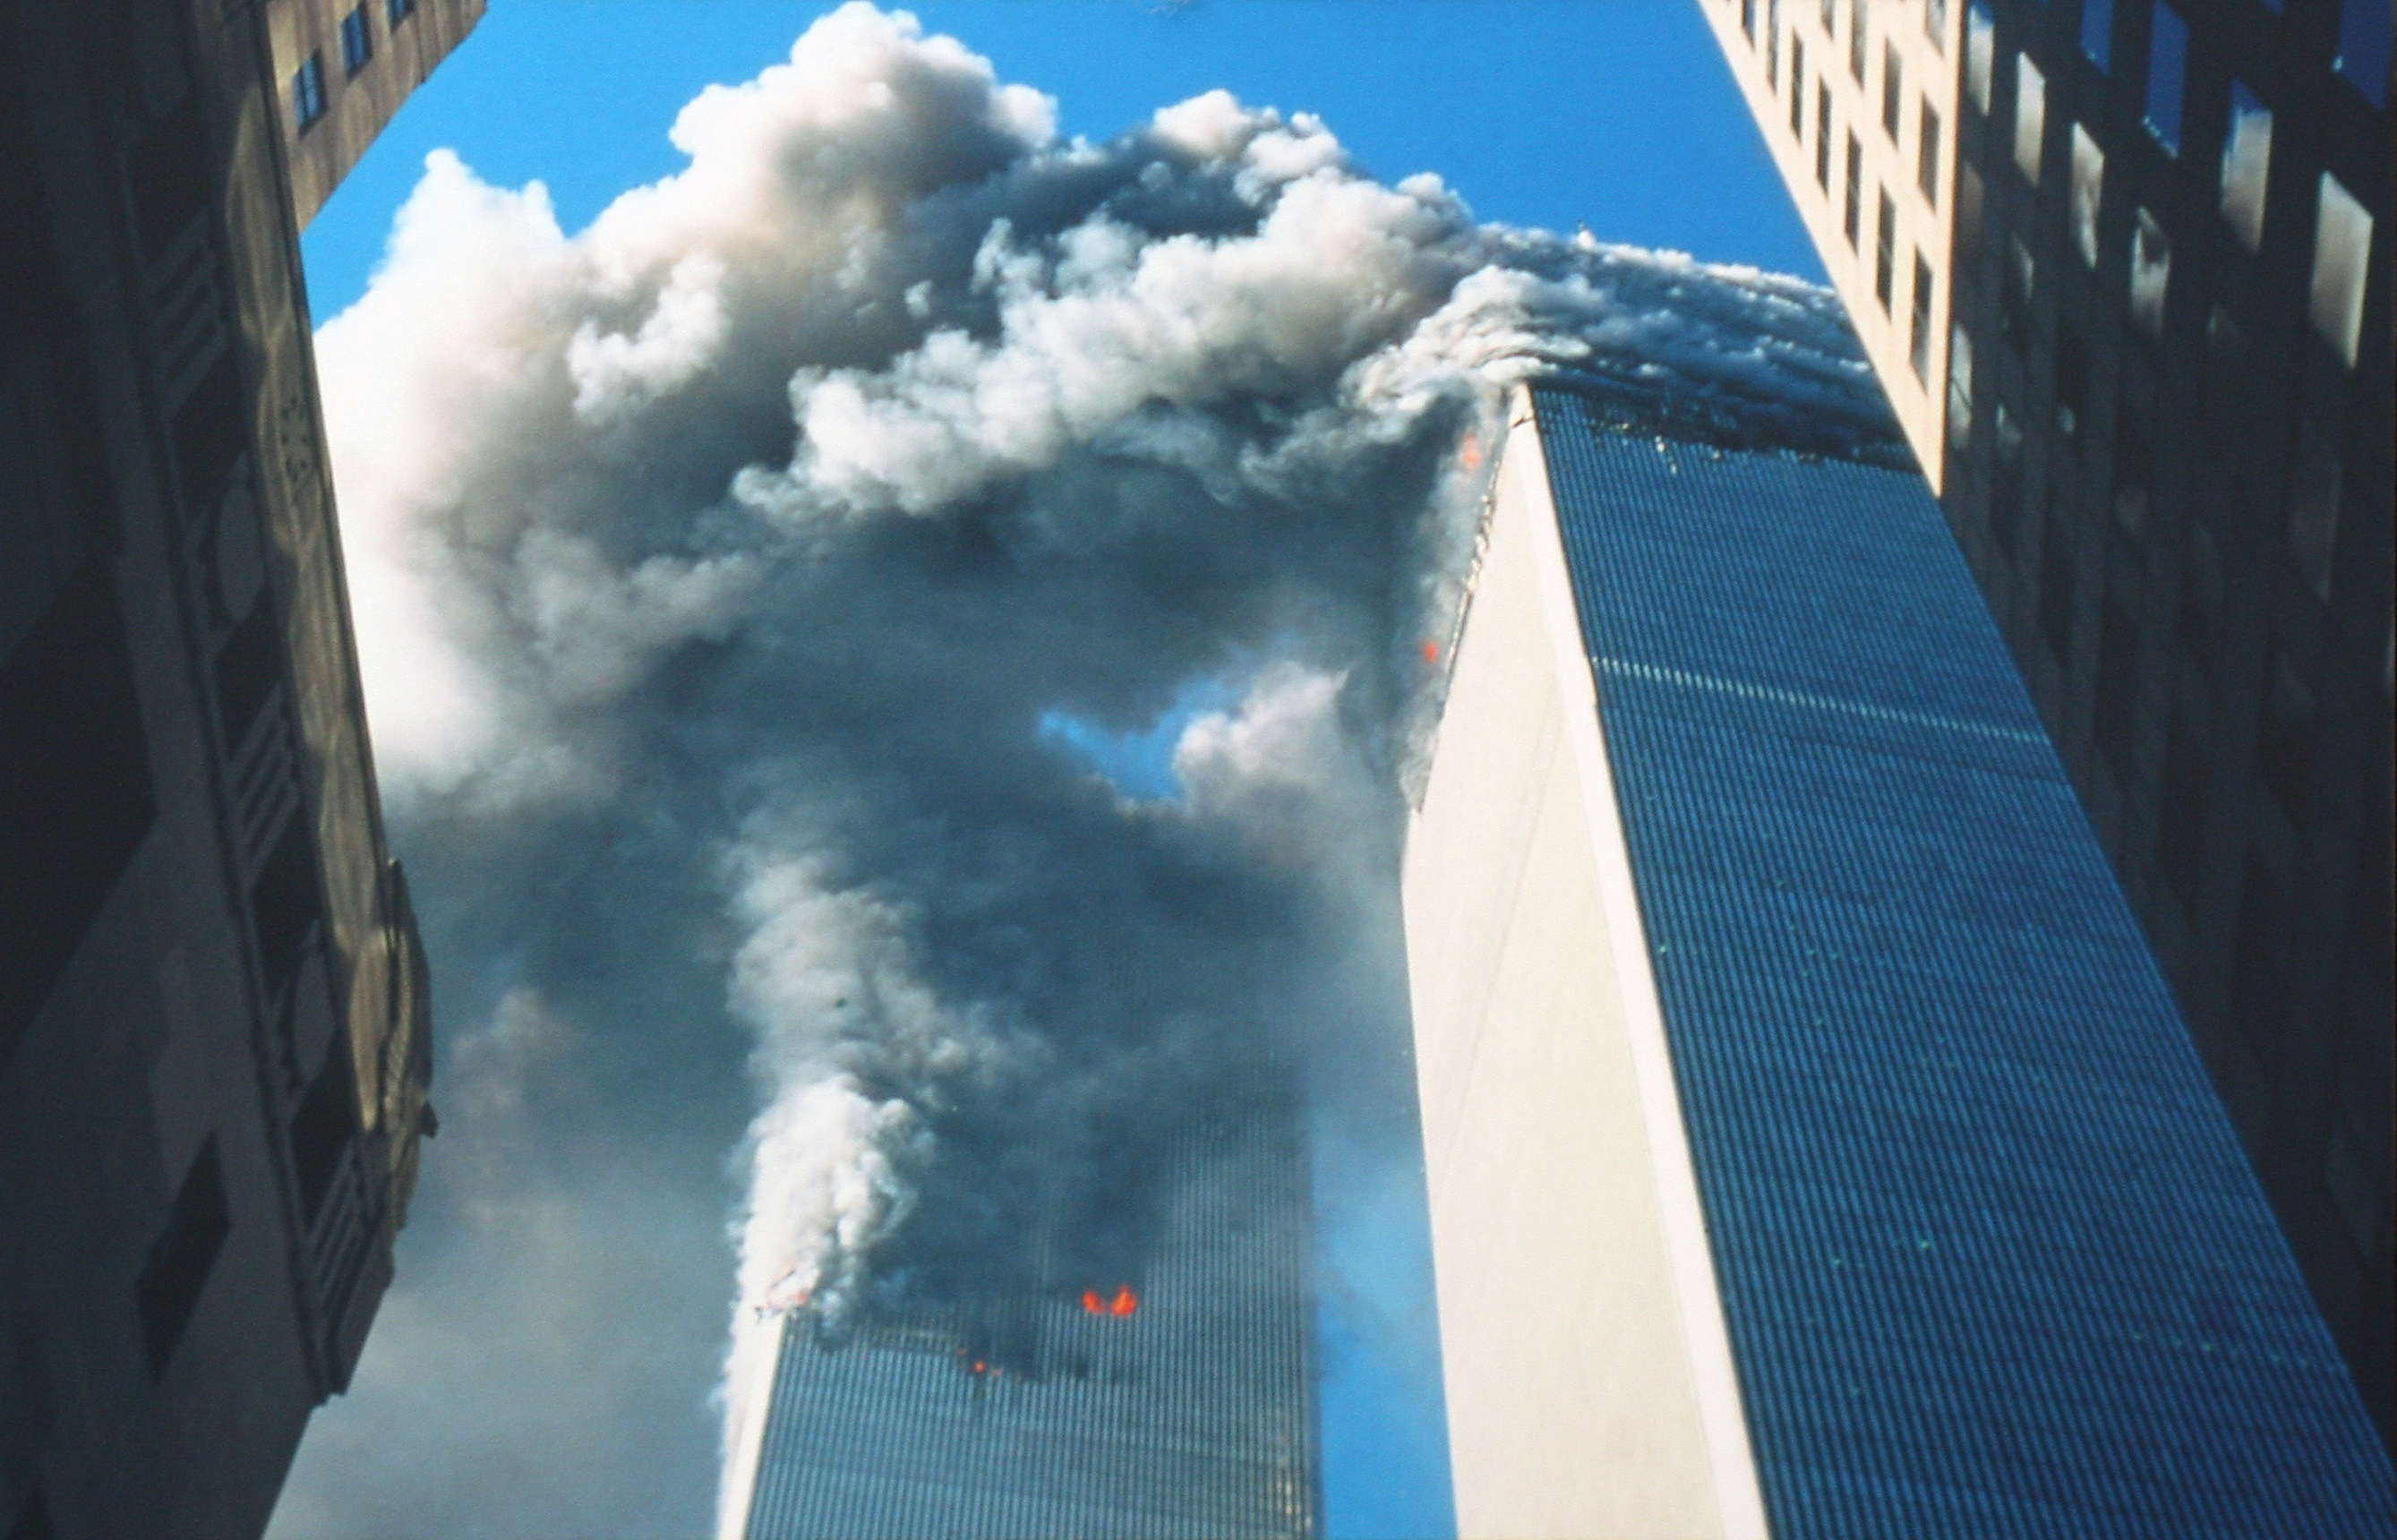 911 attacks September 11 2001 Film strip of the last photos taken by photojournalist Bill Biggart on September 11, 2001. His body was later found with three cameras and six rolls of film. Photo by Cliff Nostri Imago on Flickr.